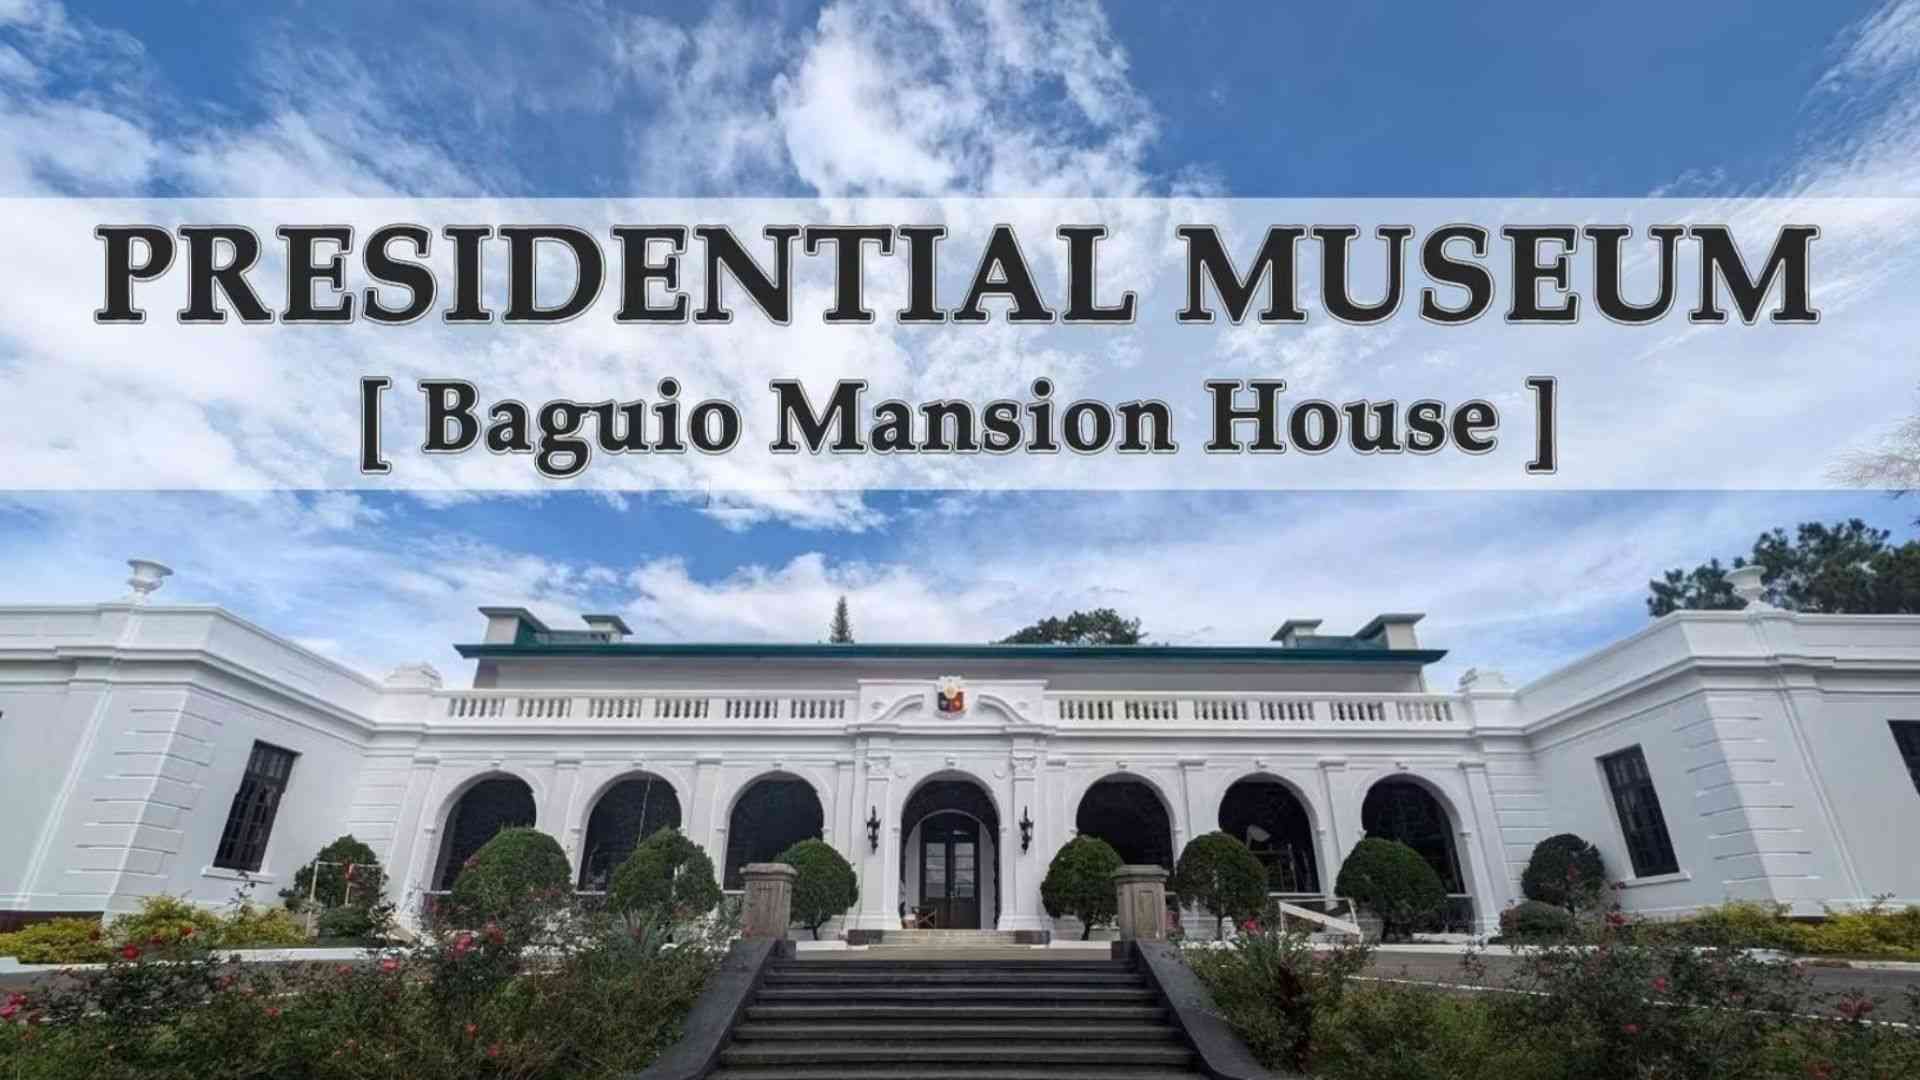 Presidential Museum to open in Baguio Mansion House